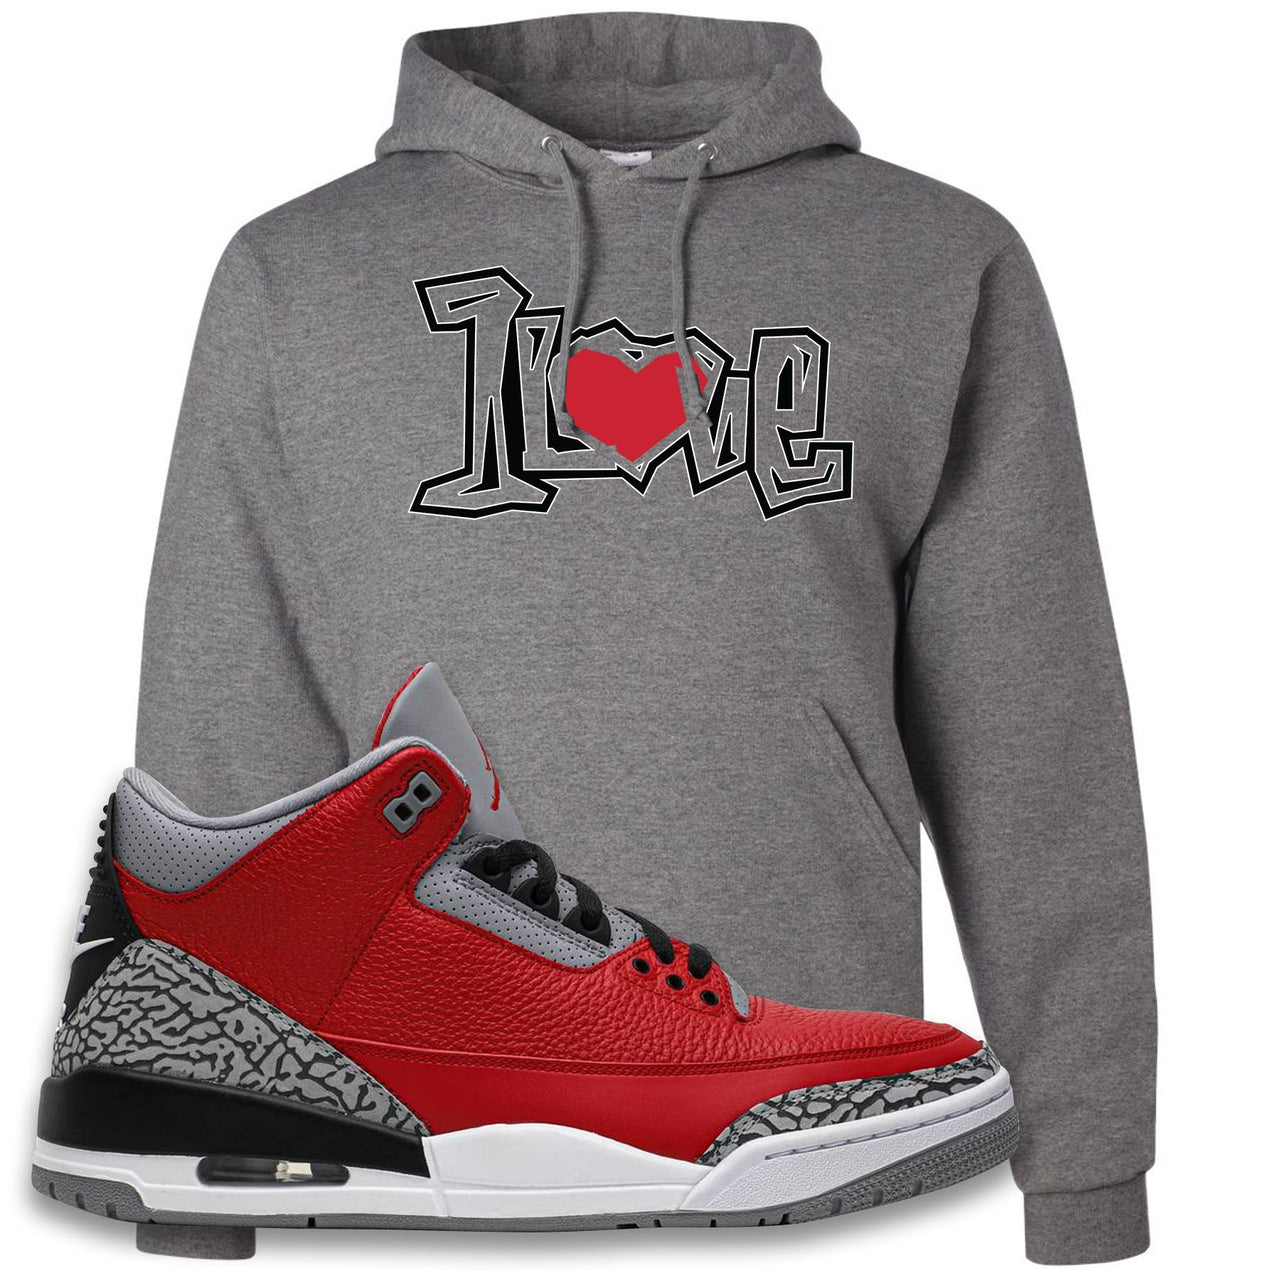 Jordan 3 Red Cement Chicago All-Star Sneaker Oxford Pullover Hoodie | Hoodie to match Jordan 3 All Star Red Cement Shoes | 1 Love